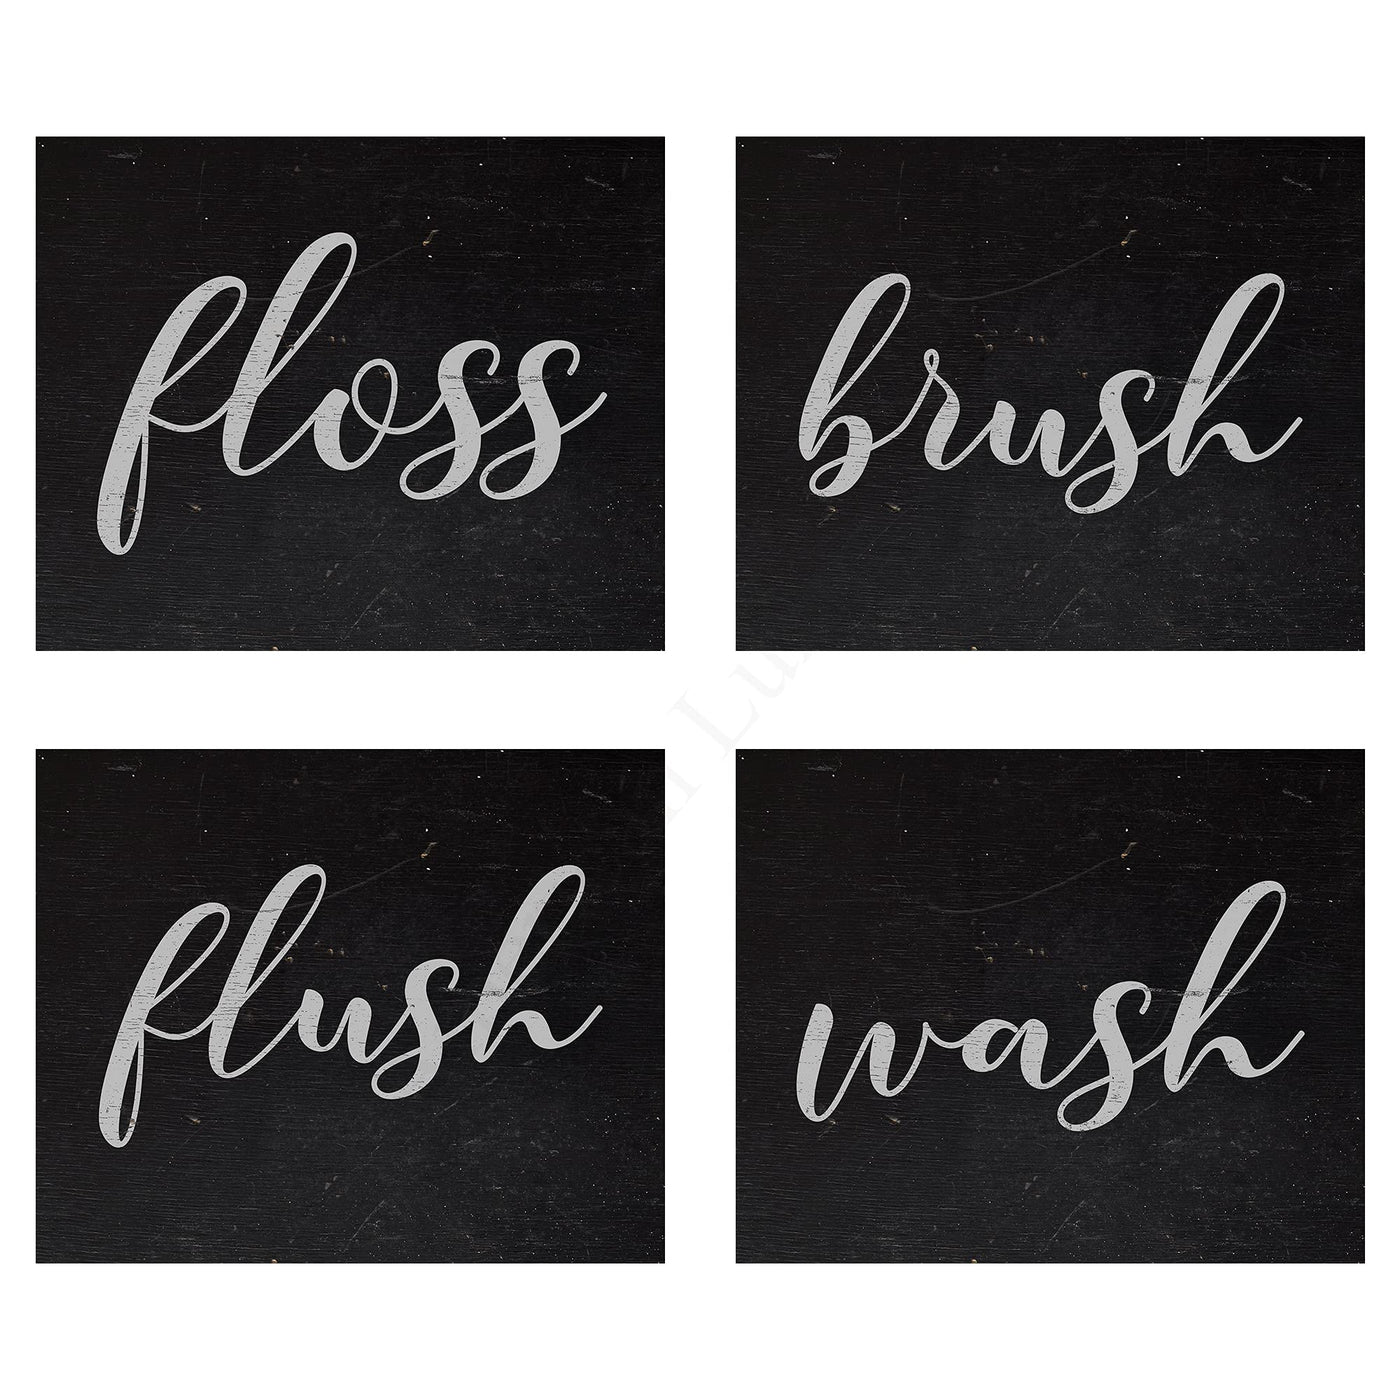 Floss-Brush-Flush-Wash Funny Bathroom Decor-Set of (4)-10 x 8" Typographic Wall Prints-Ready to Frame. Rustic Farmhouse Design. Humorous Signs-Fun Home-Guest Bathroom Decor! Printed on Photo Paper.